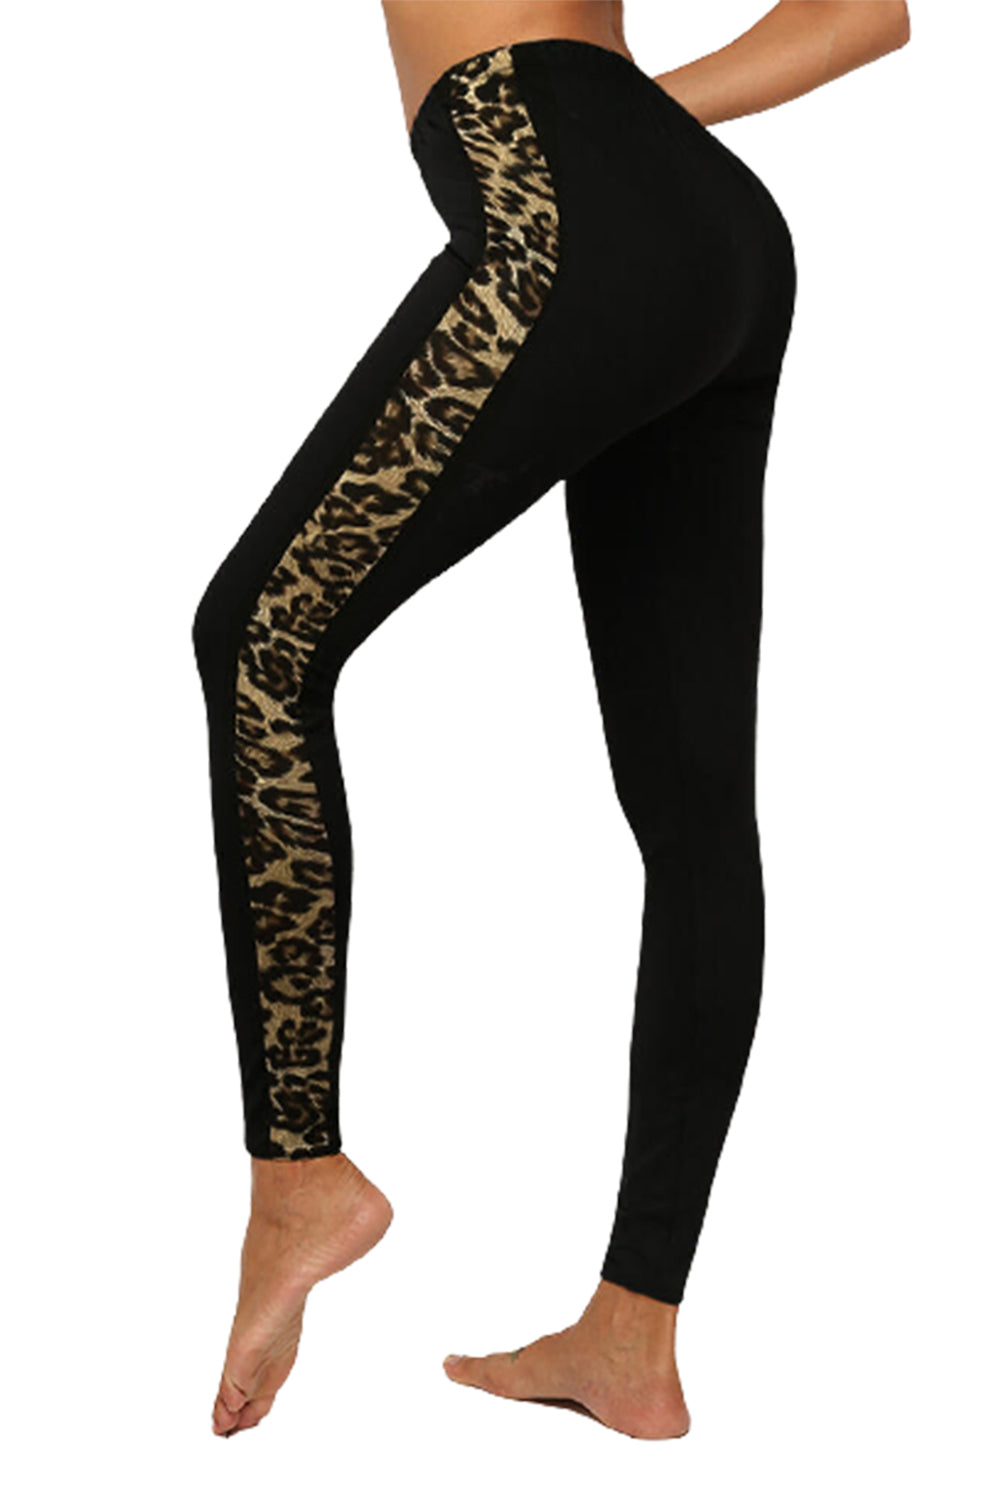 Stretchy Close Fitting Leopard Print Workout Pants